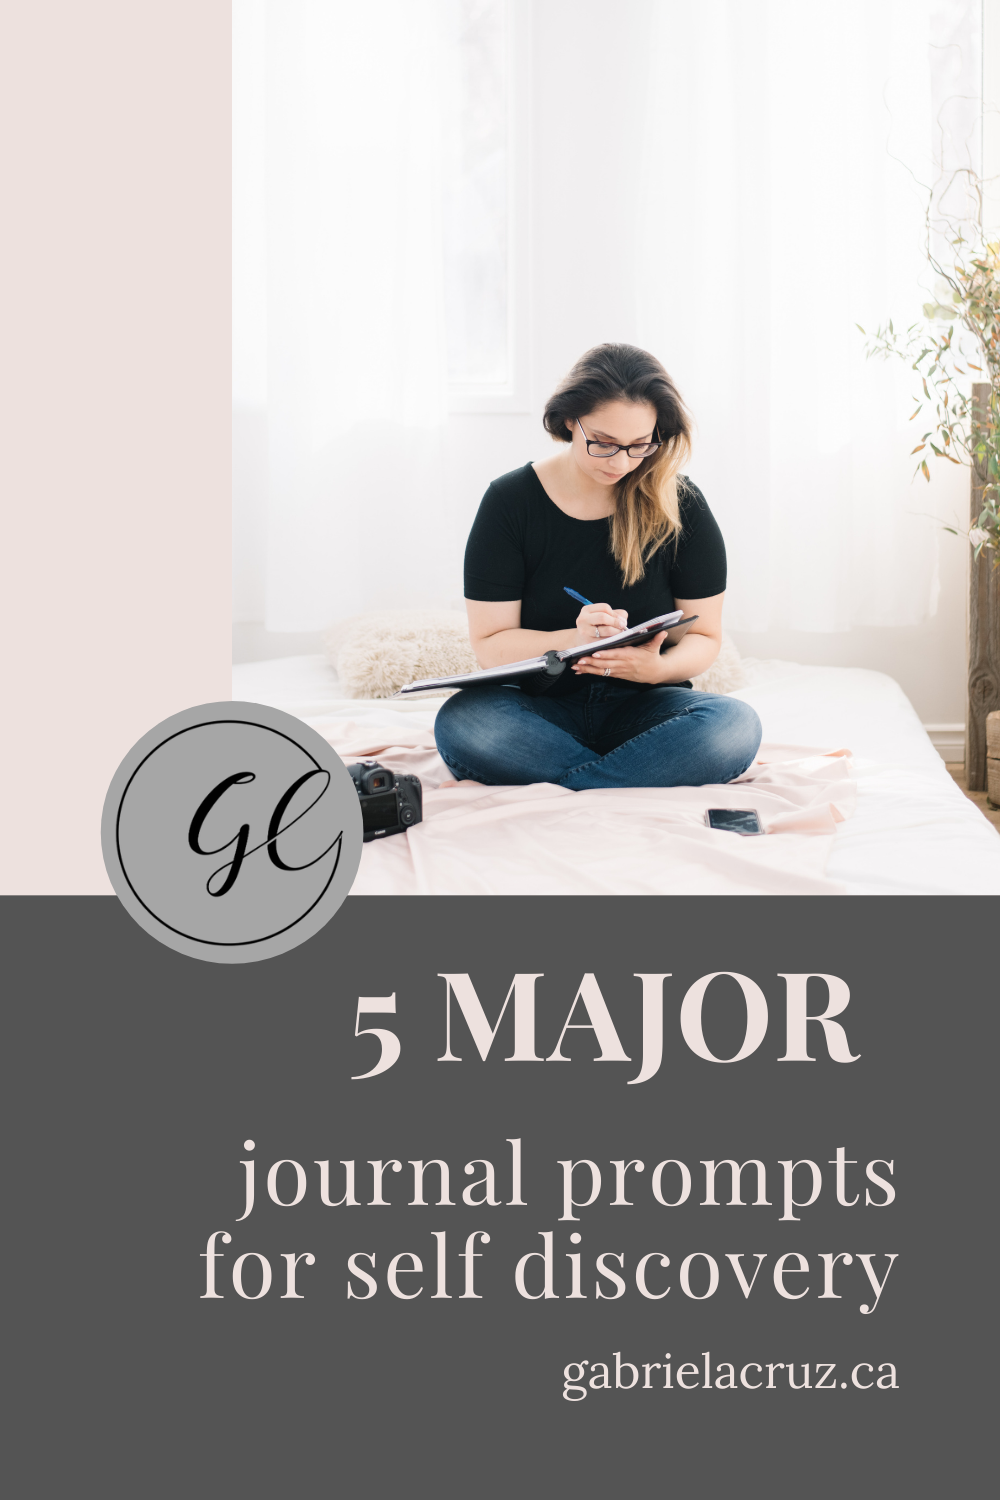 These 5 journal prompts will help you on your road to self-discovery and self-acceptance. No matter what your starting point. | #self-discovery #selfdiscovery #journalprompts #diaryprompts